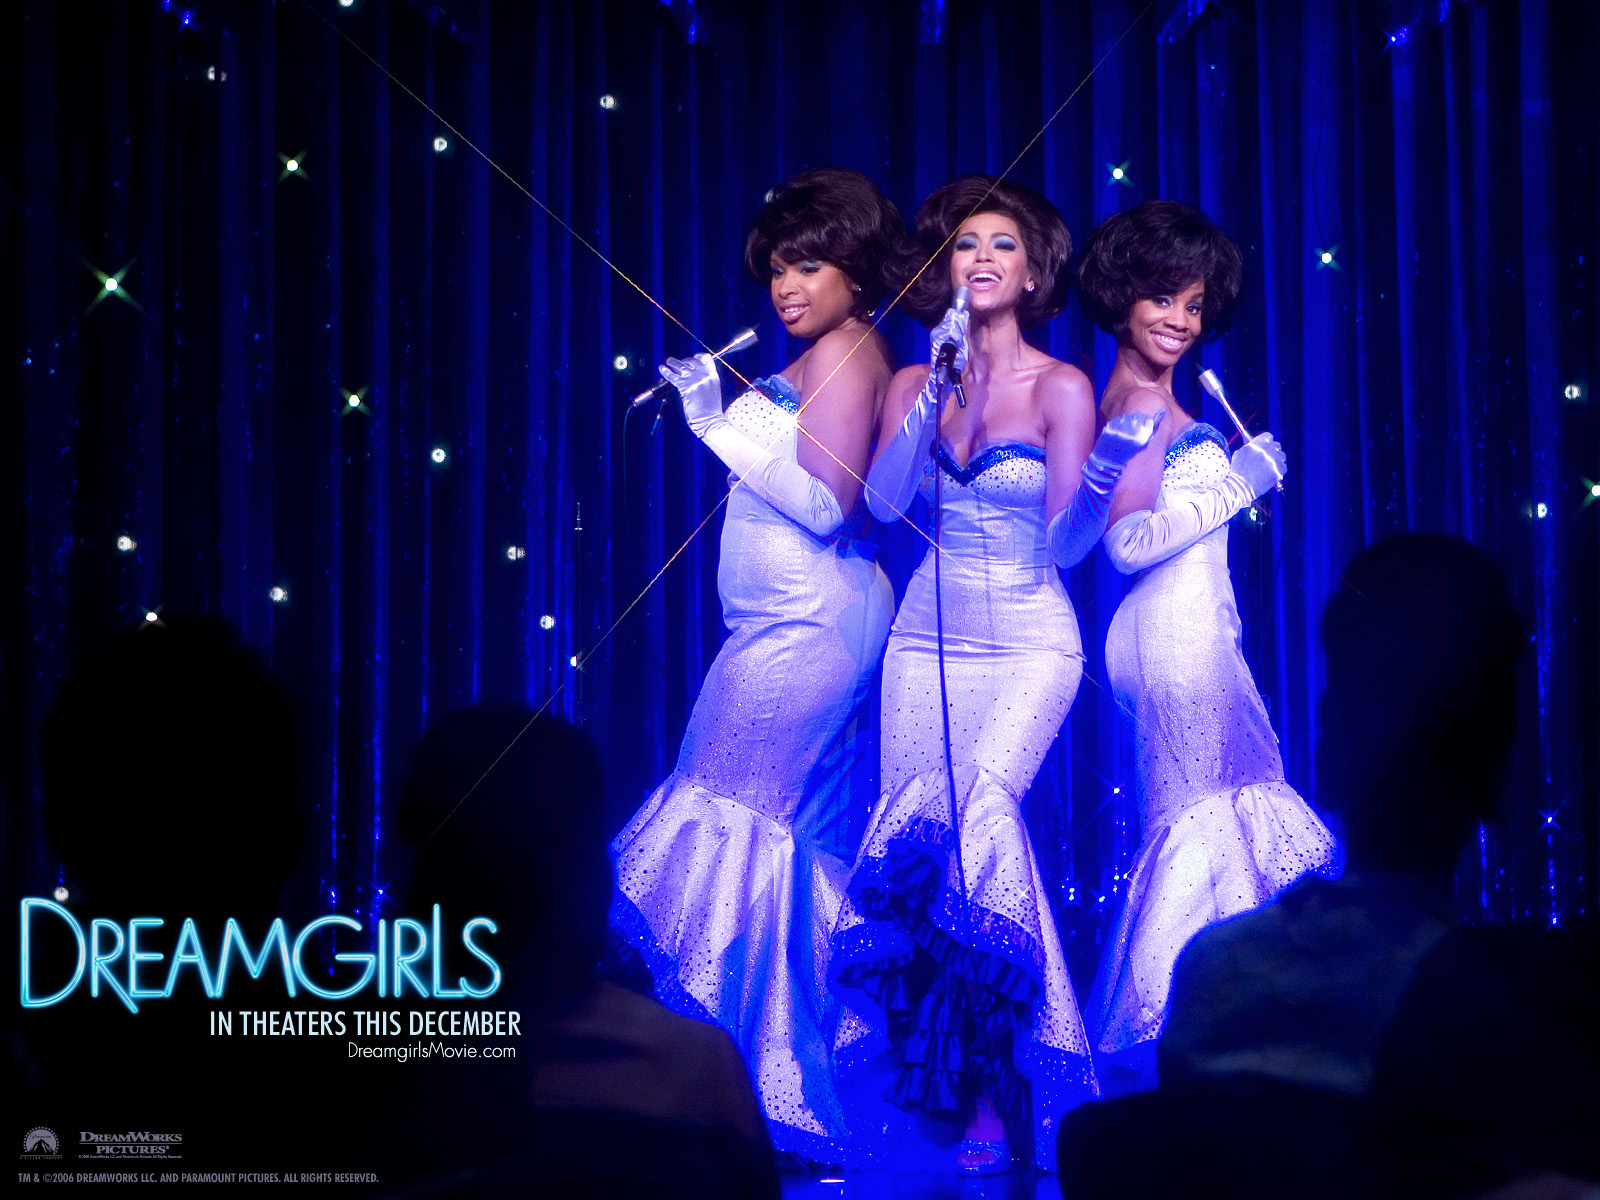 Dreamgirls wallpapers and images - wallpapers, pictures, photos